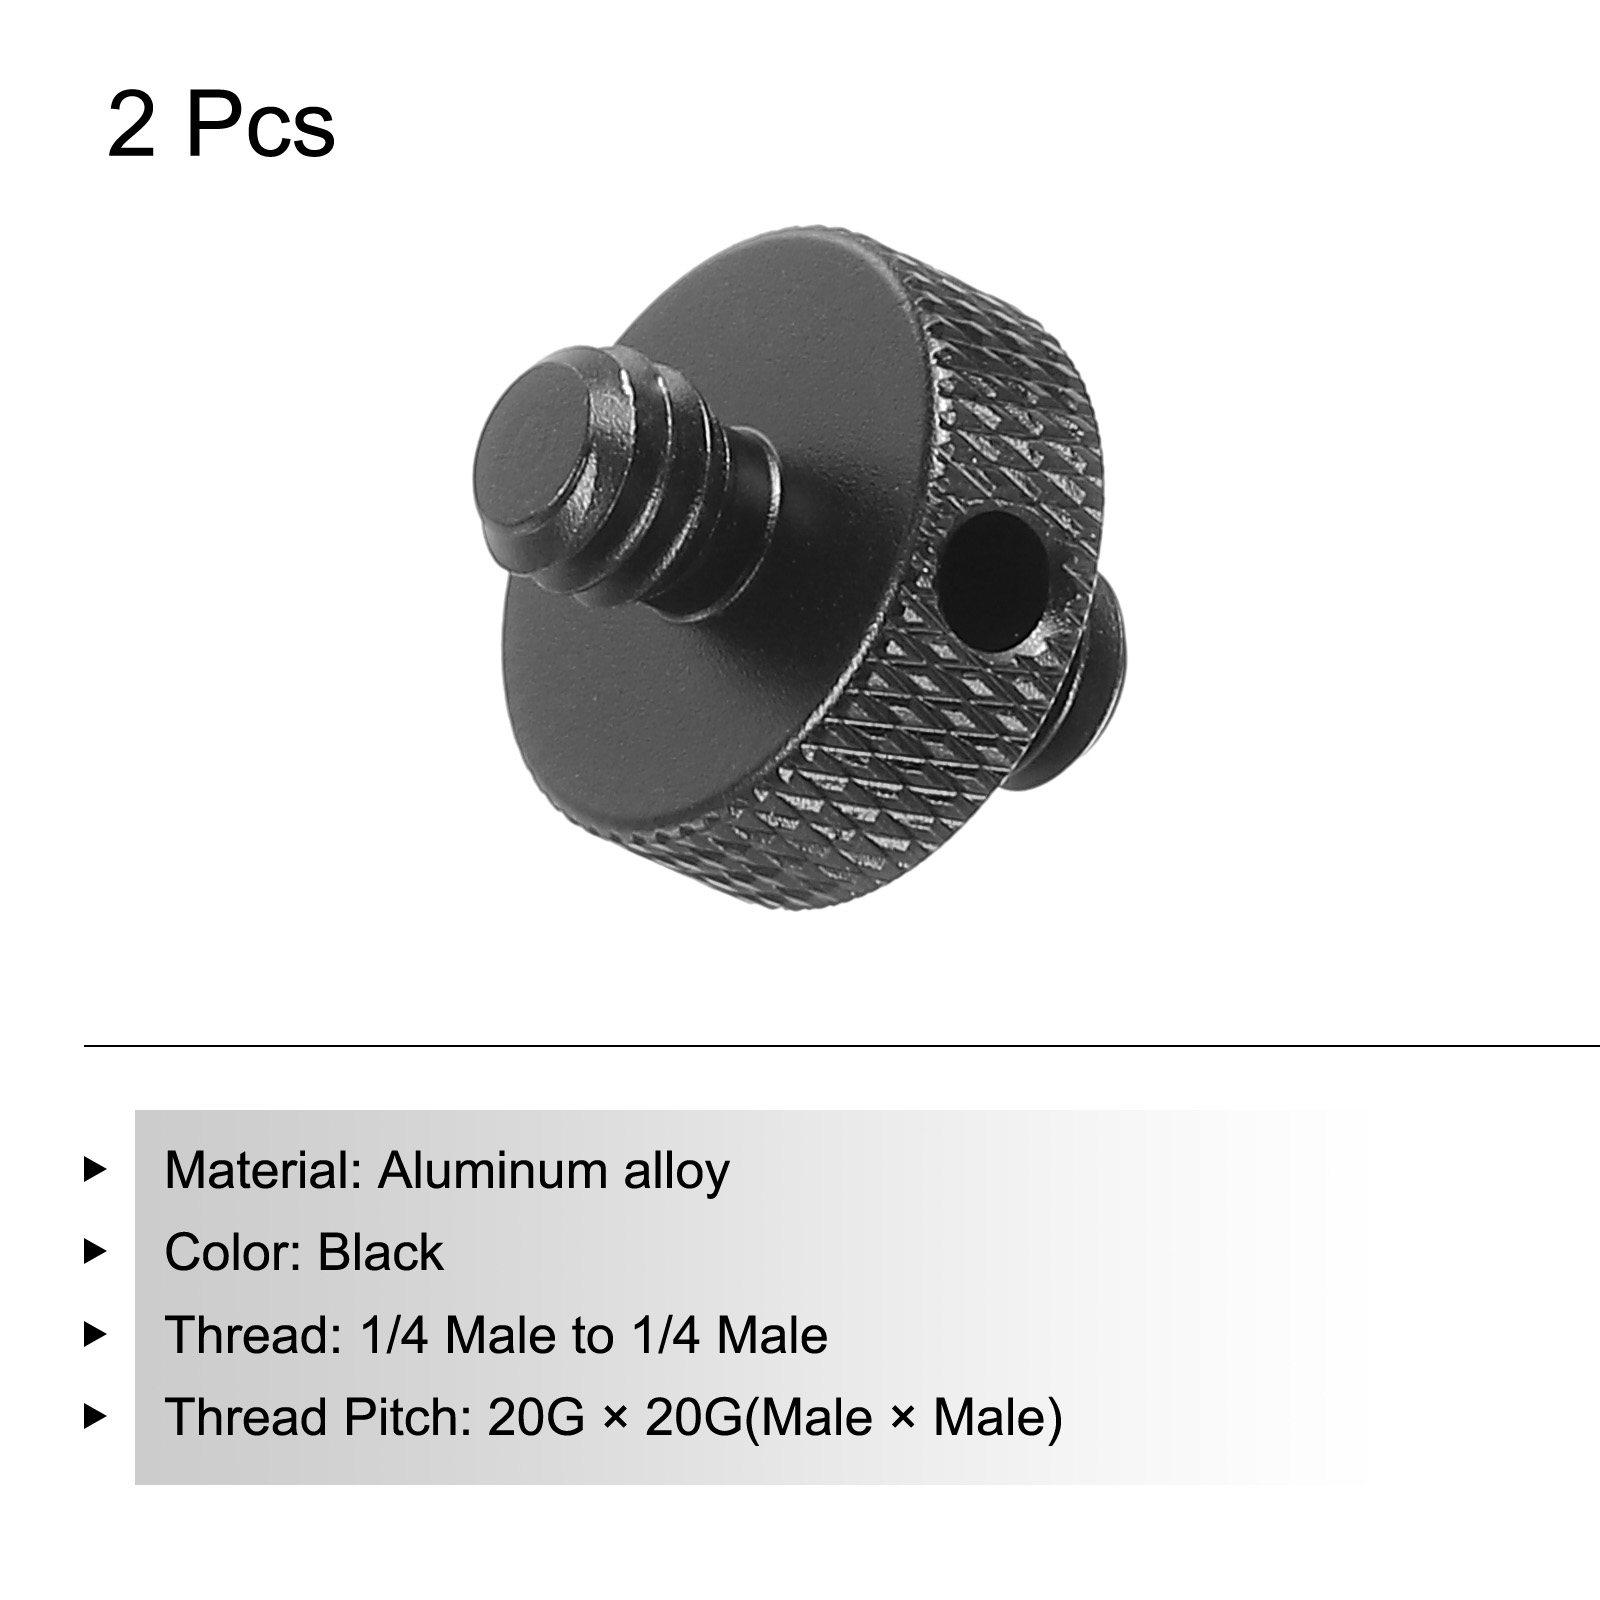 Uxcell Mic Stand Adapter 1/4 Male to 1/4 Male Thread Tripod Screw with Hole Double Sides Camera Screw Black 2 Pack - image 3 of 6